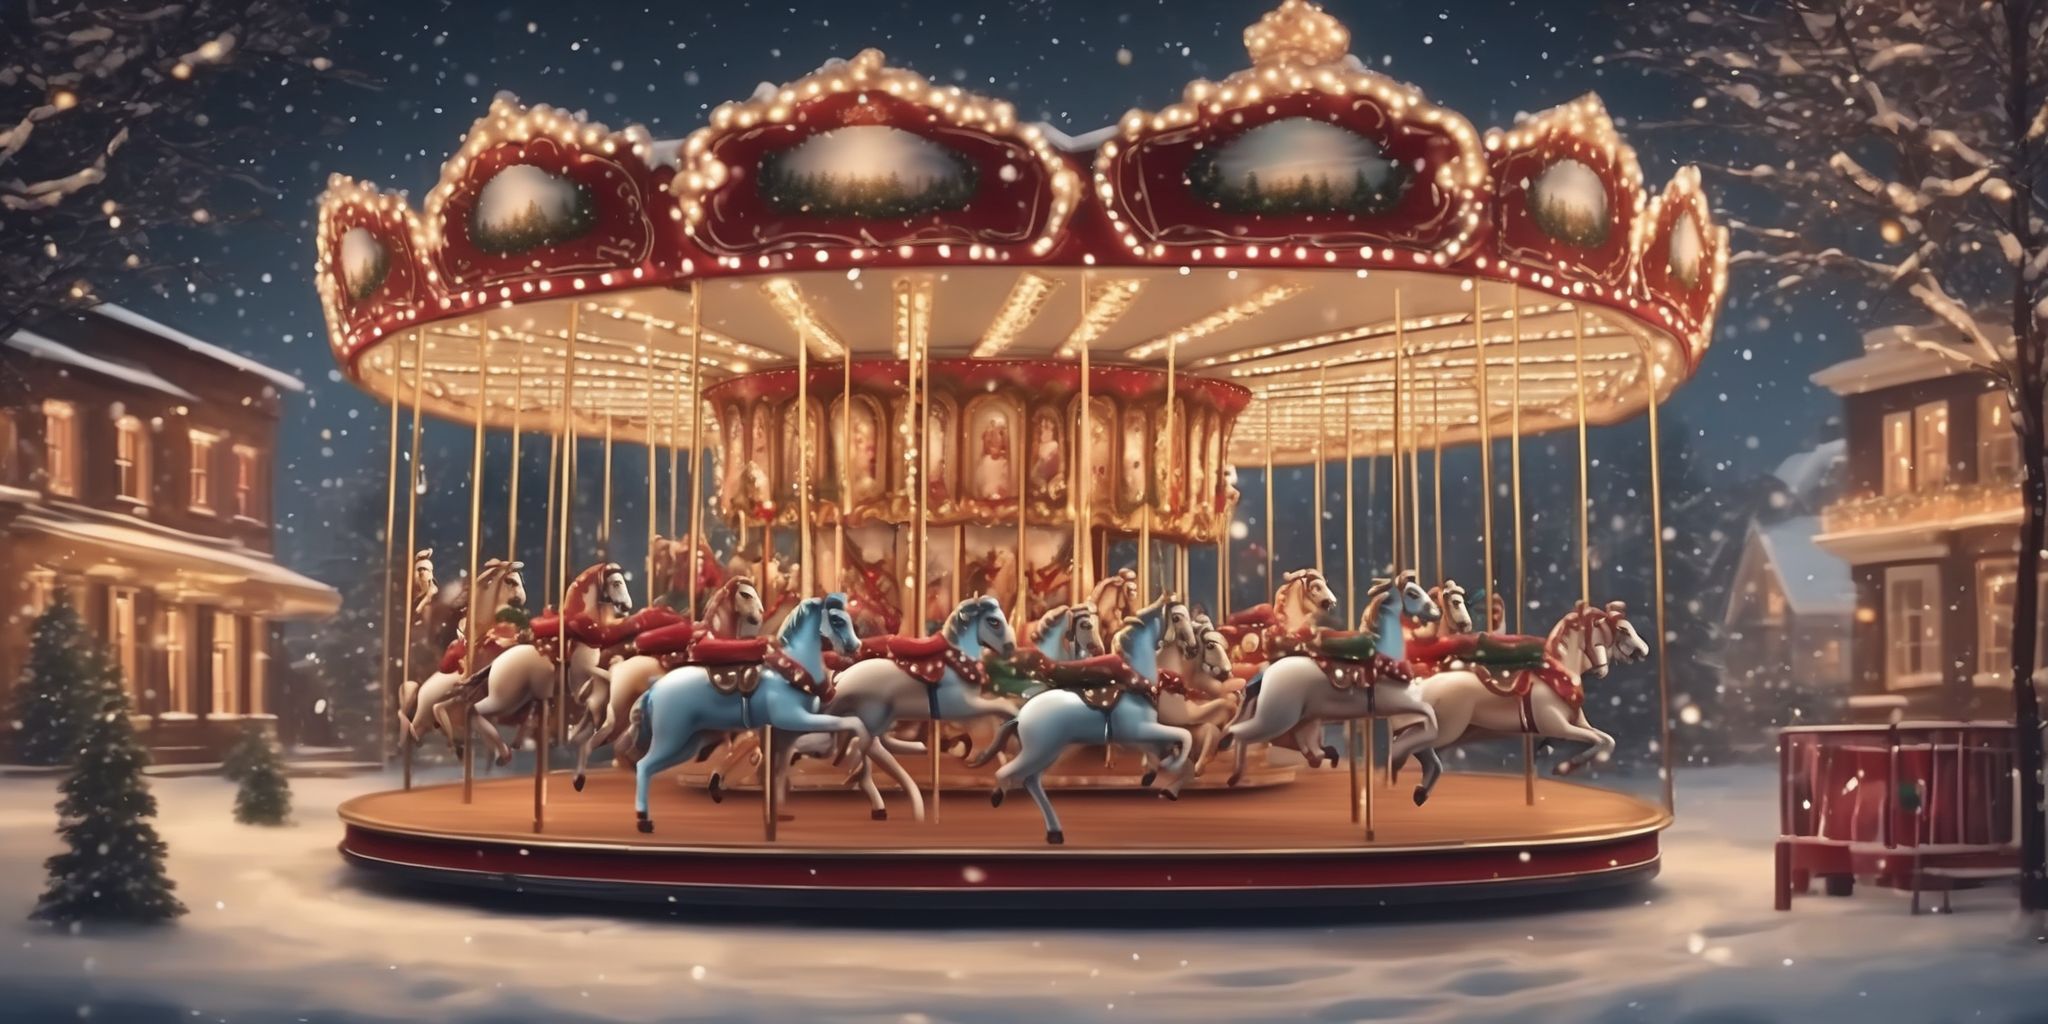 Carousel in realistic Christmas style